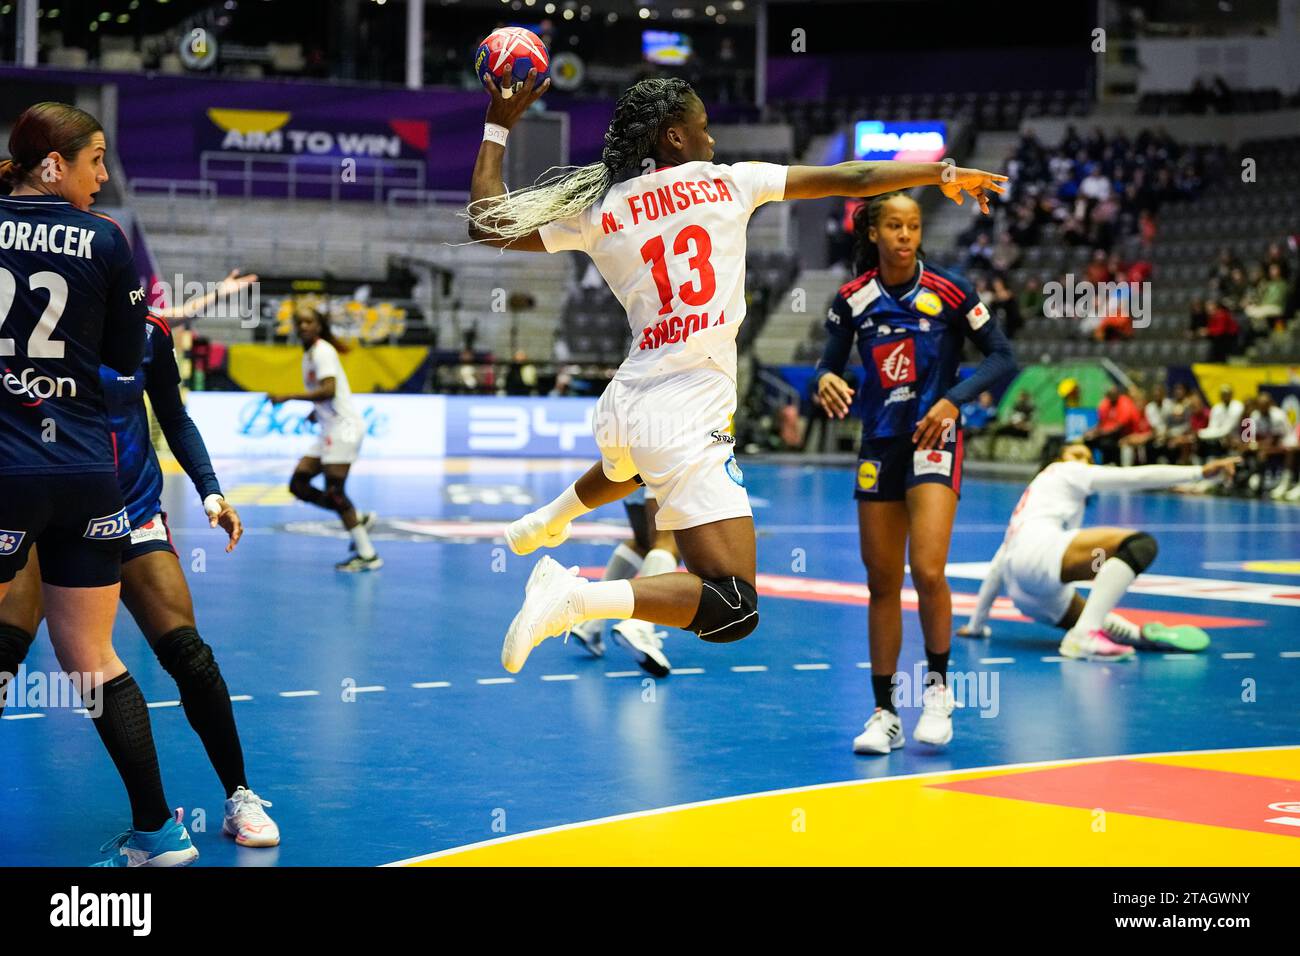 Stavanger 20231130.Angola's Natália Fonseca during the World Championship group stage match between France and Angola in the DNB Arena. Photo: Beate Oma Dahle / NTB Stock Photo